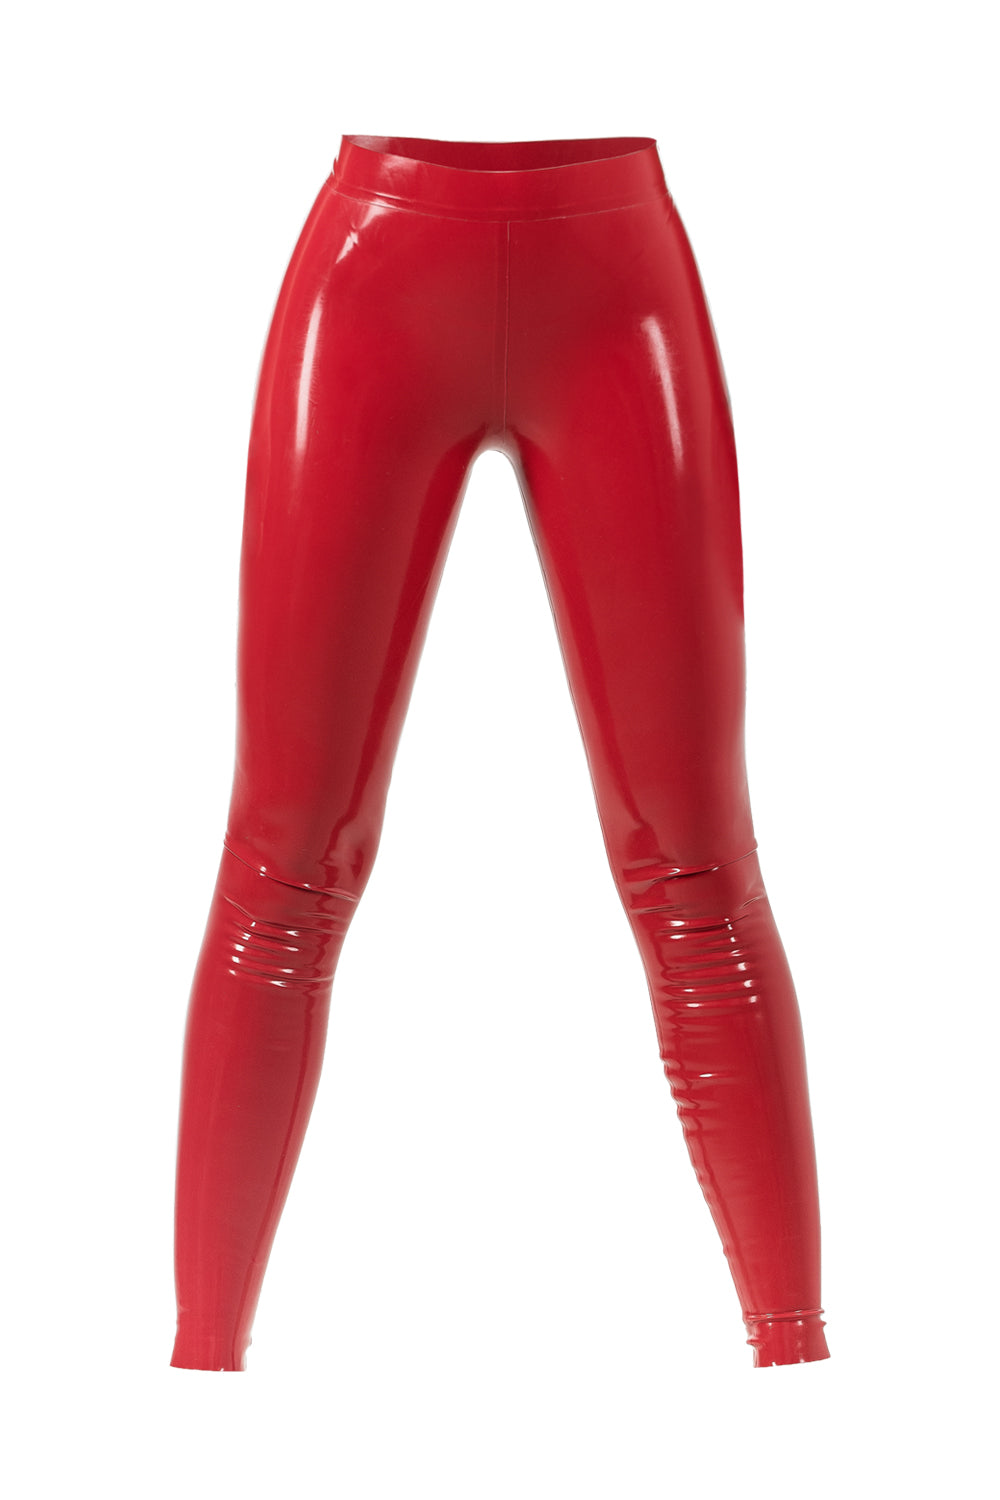 Latex Leggings with Waistband. Red